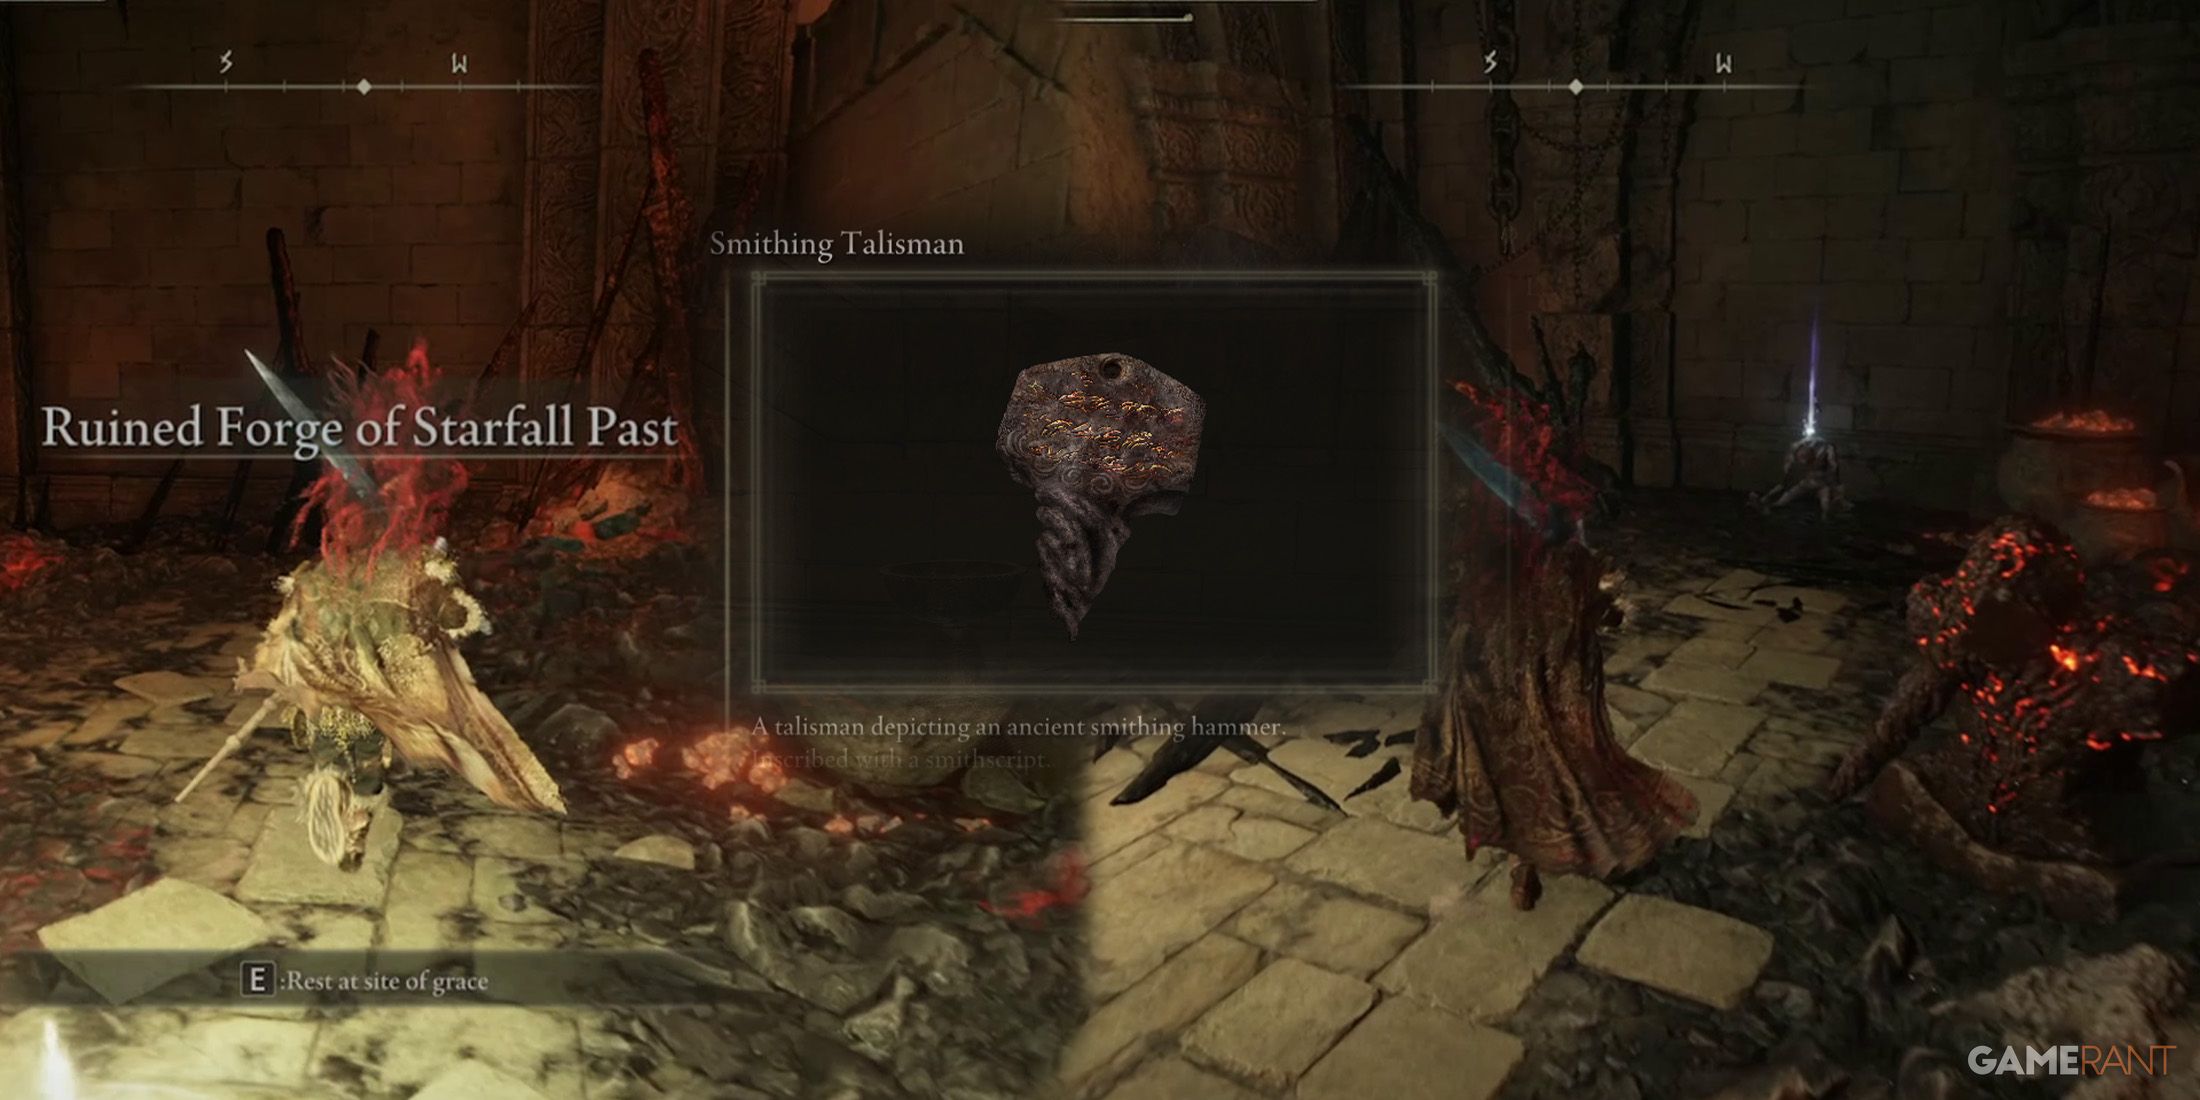 featured image, how to find the smithing talisman in shadow of the erdtree